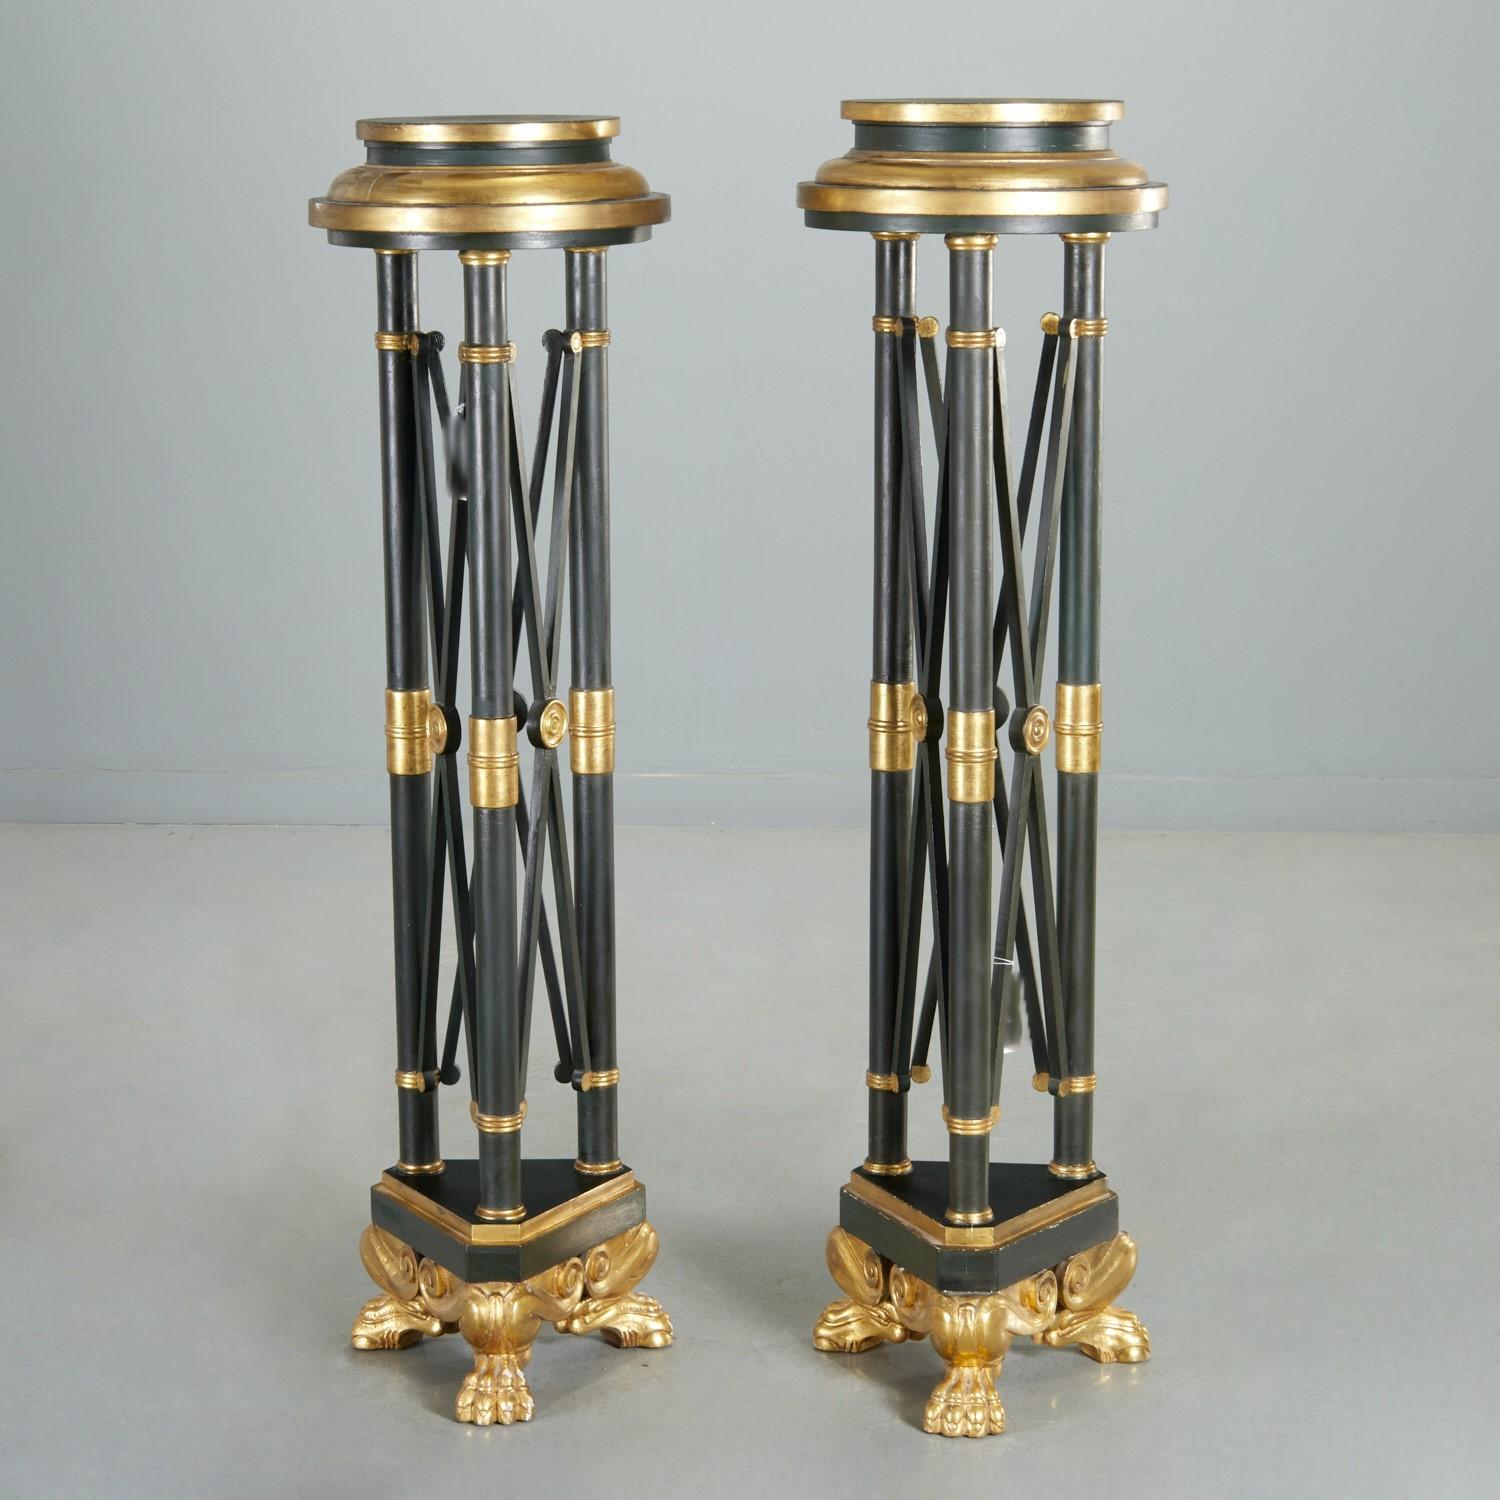 Vintage Empire Style Ebonised and Giltwood Torchiere Pedestals, a Pair For Sale 1